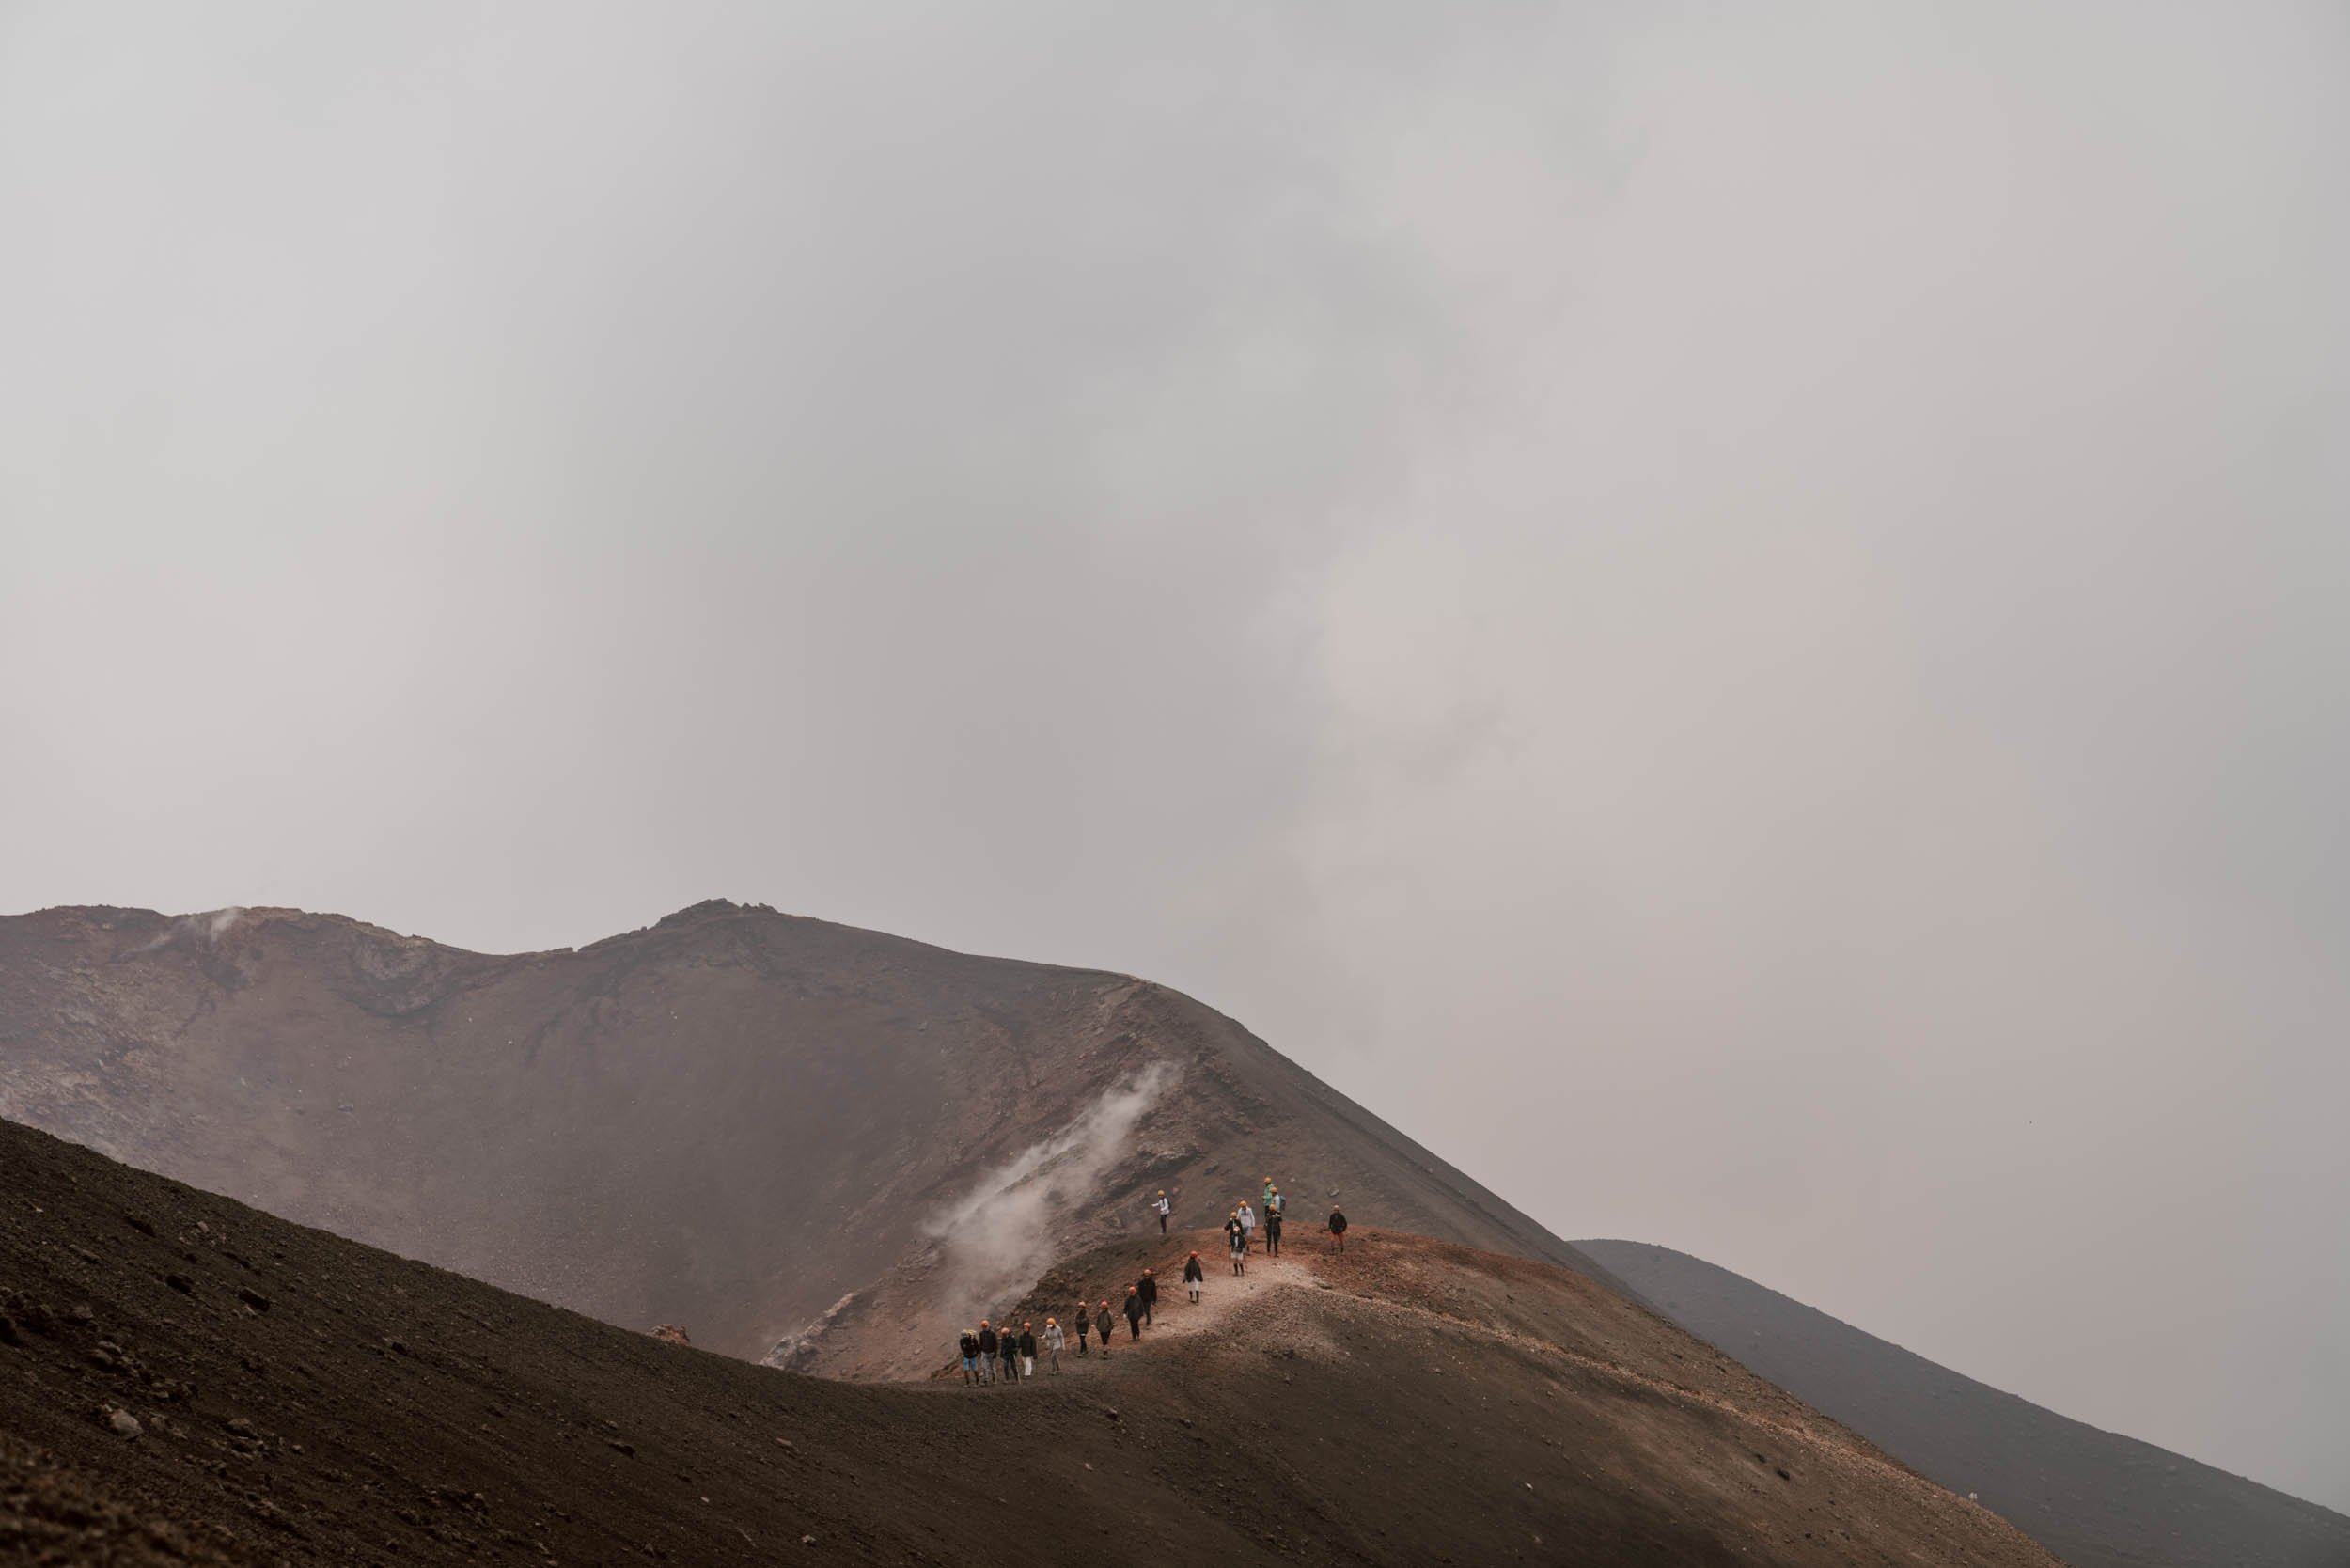 Visiting Mount Etna | Everything You Need To Know Before the Hike